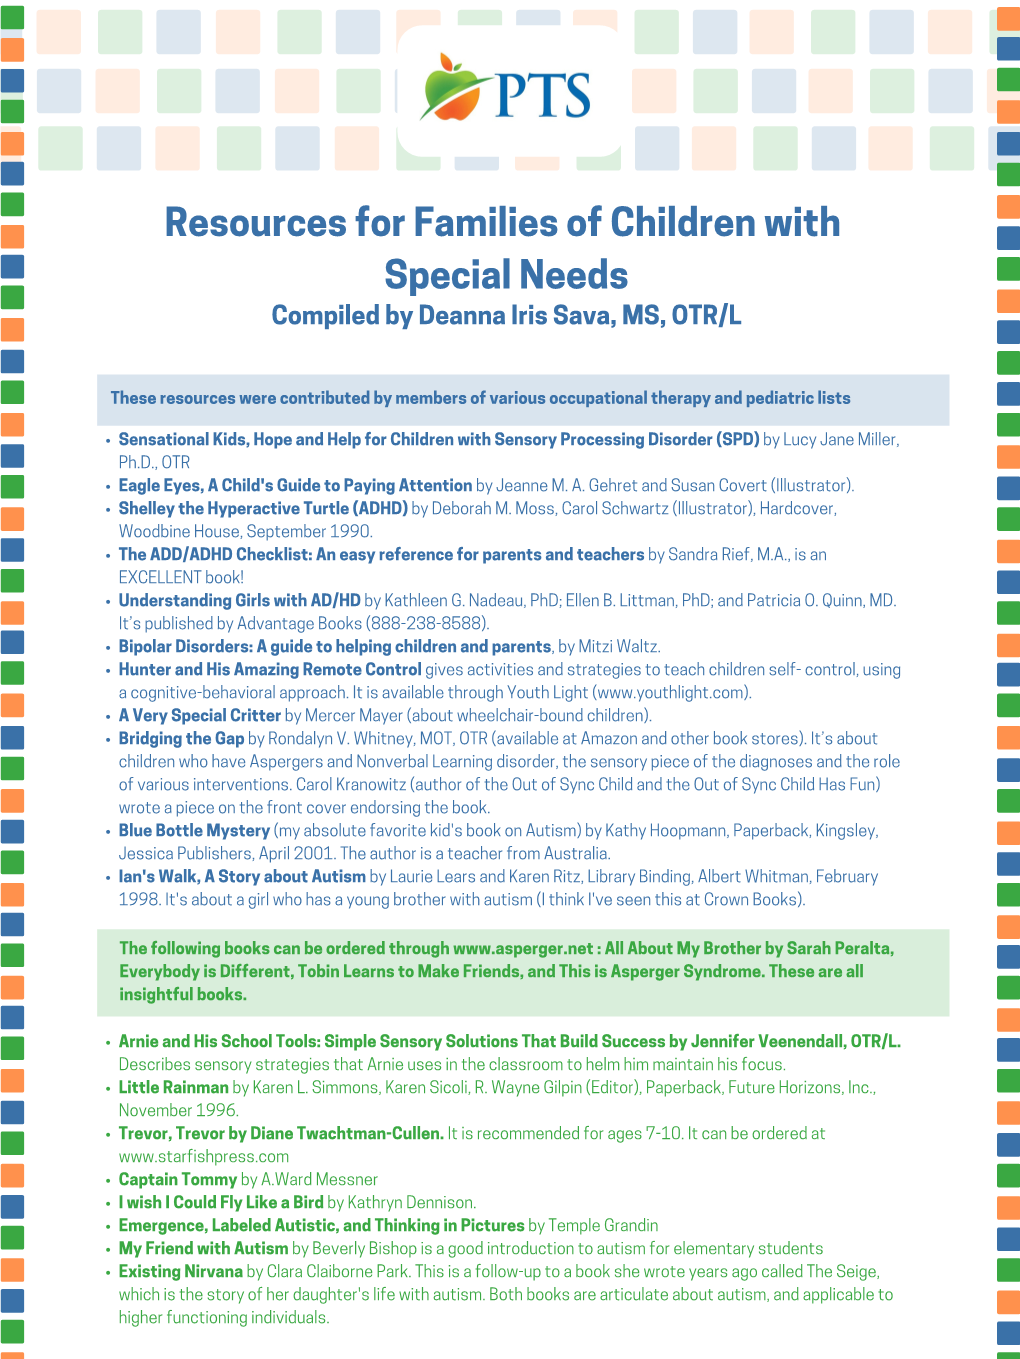 Resources for Families of Children with Special Needs Compiled by Deanna Iris Sava, MS, OTR/L